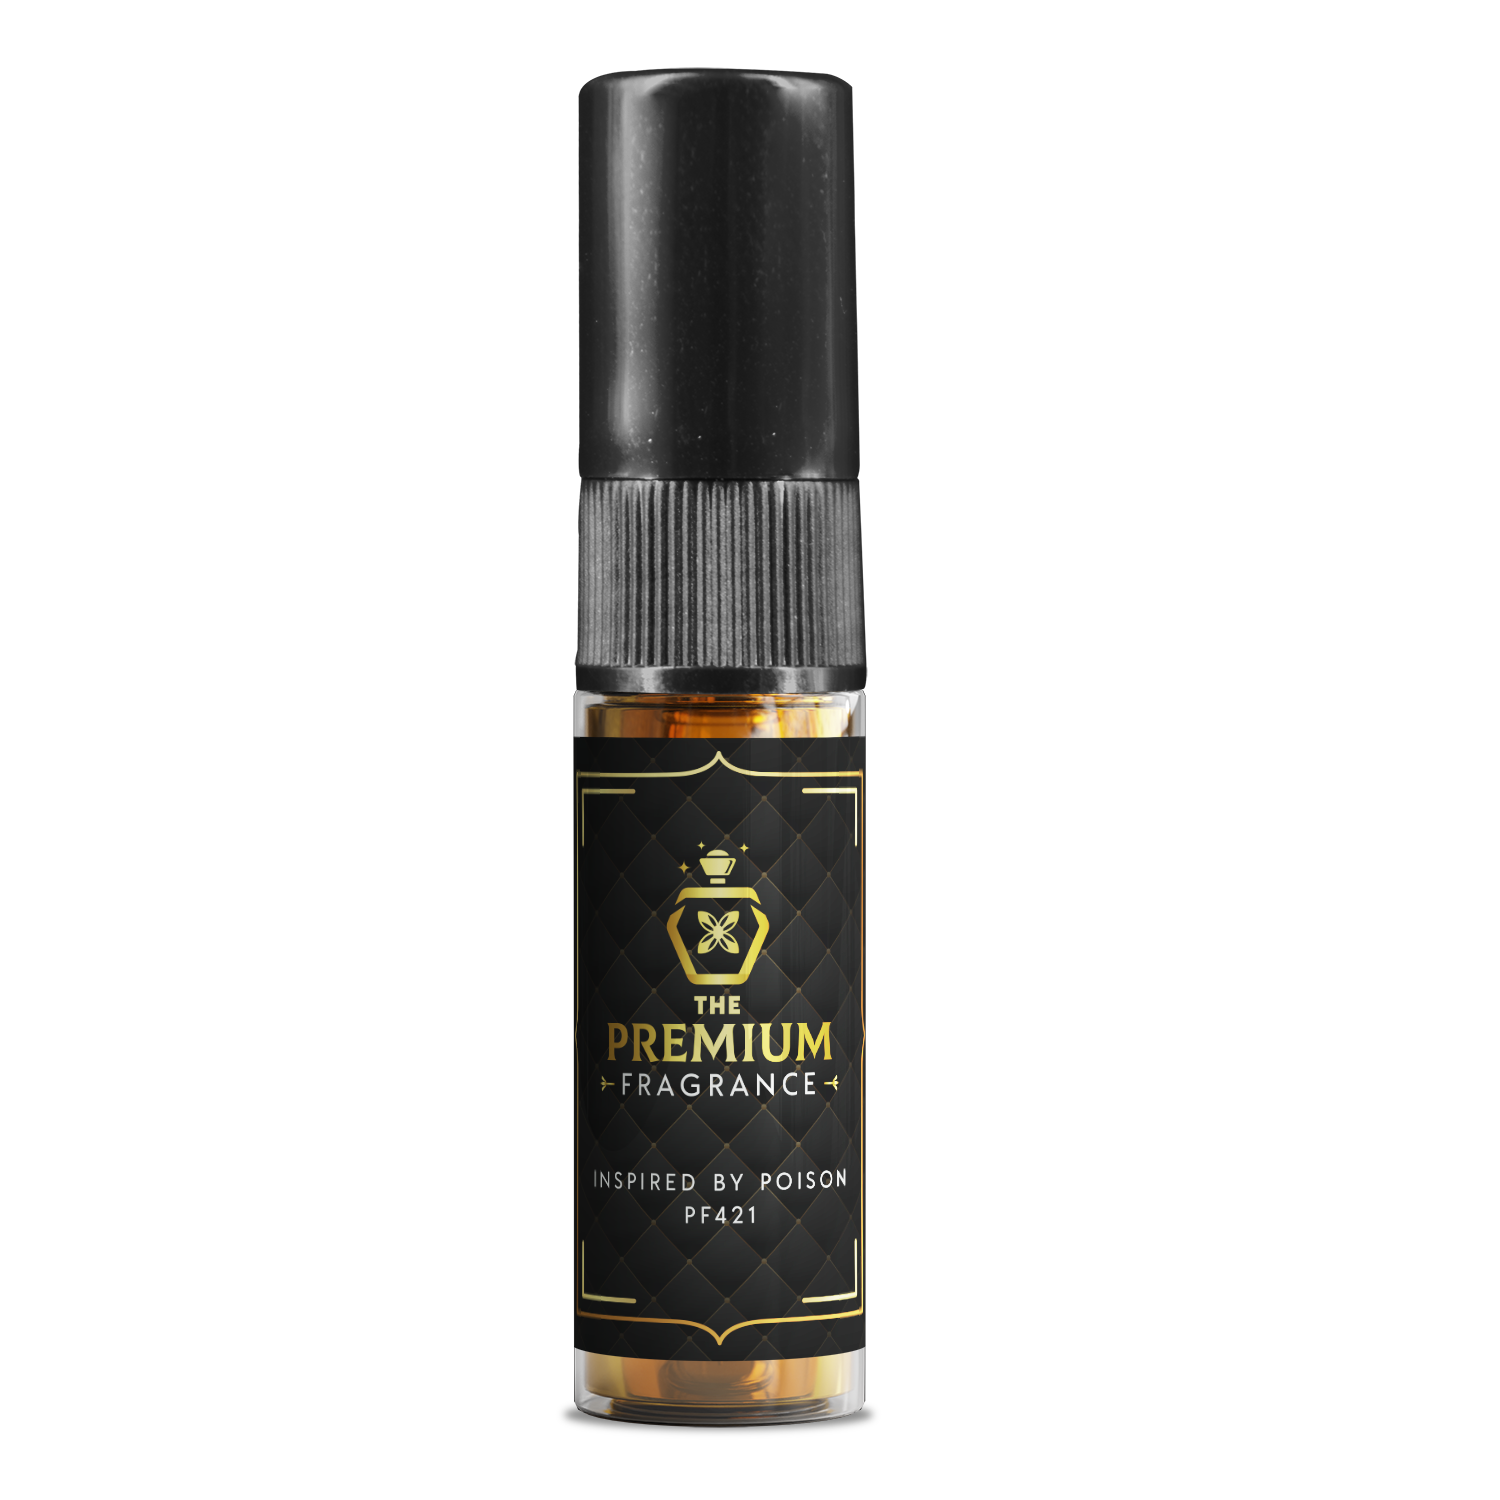 inspired by Poison 3ml - The Premium Fragrance PF421